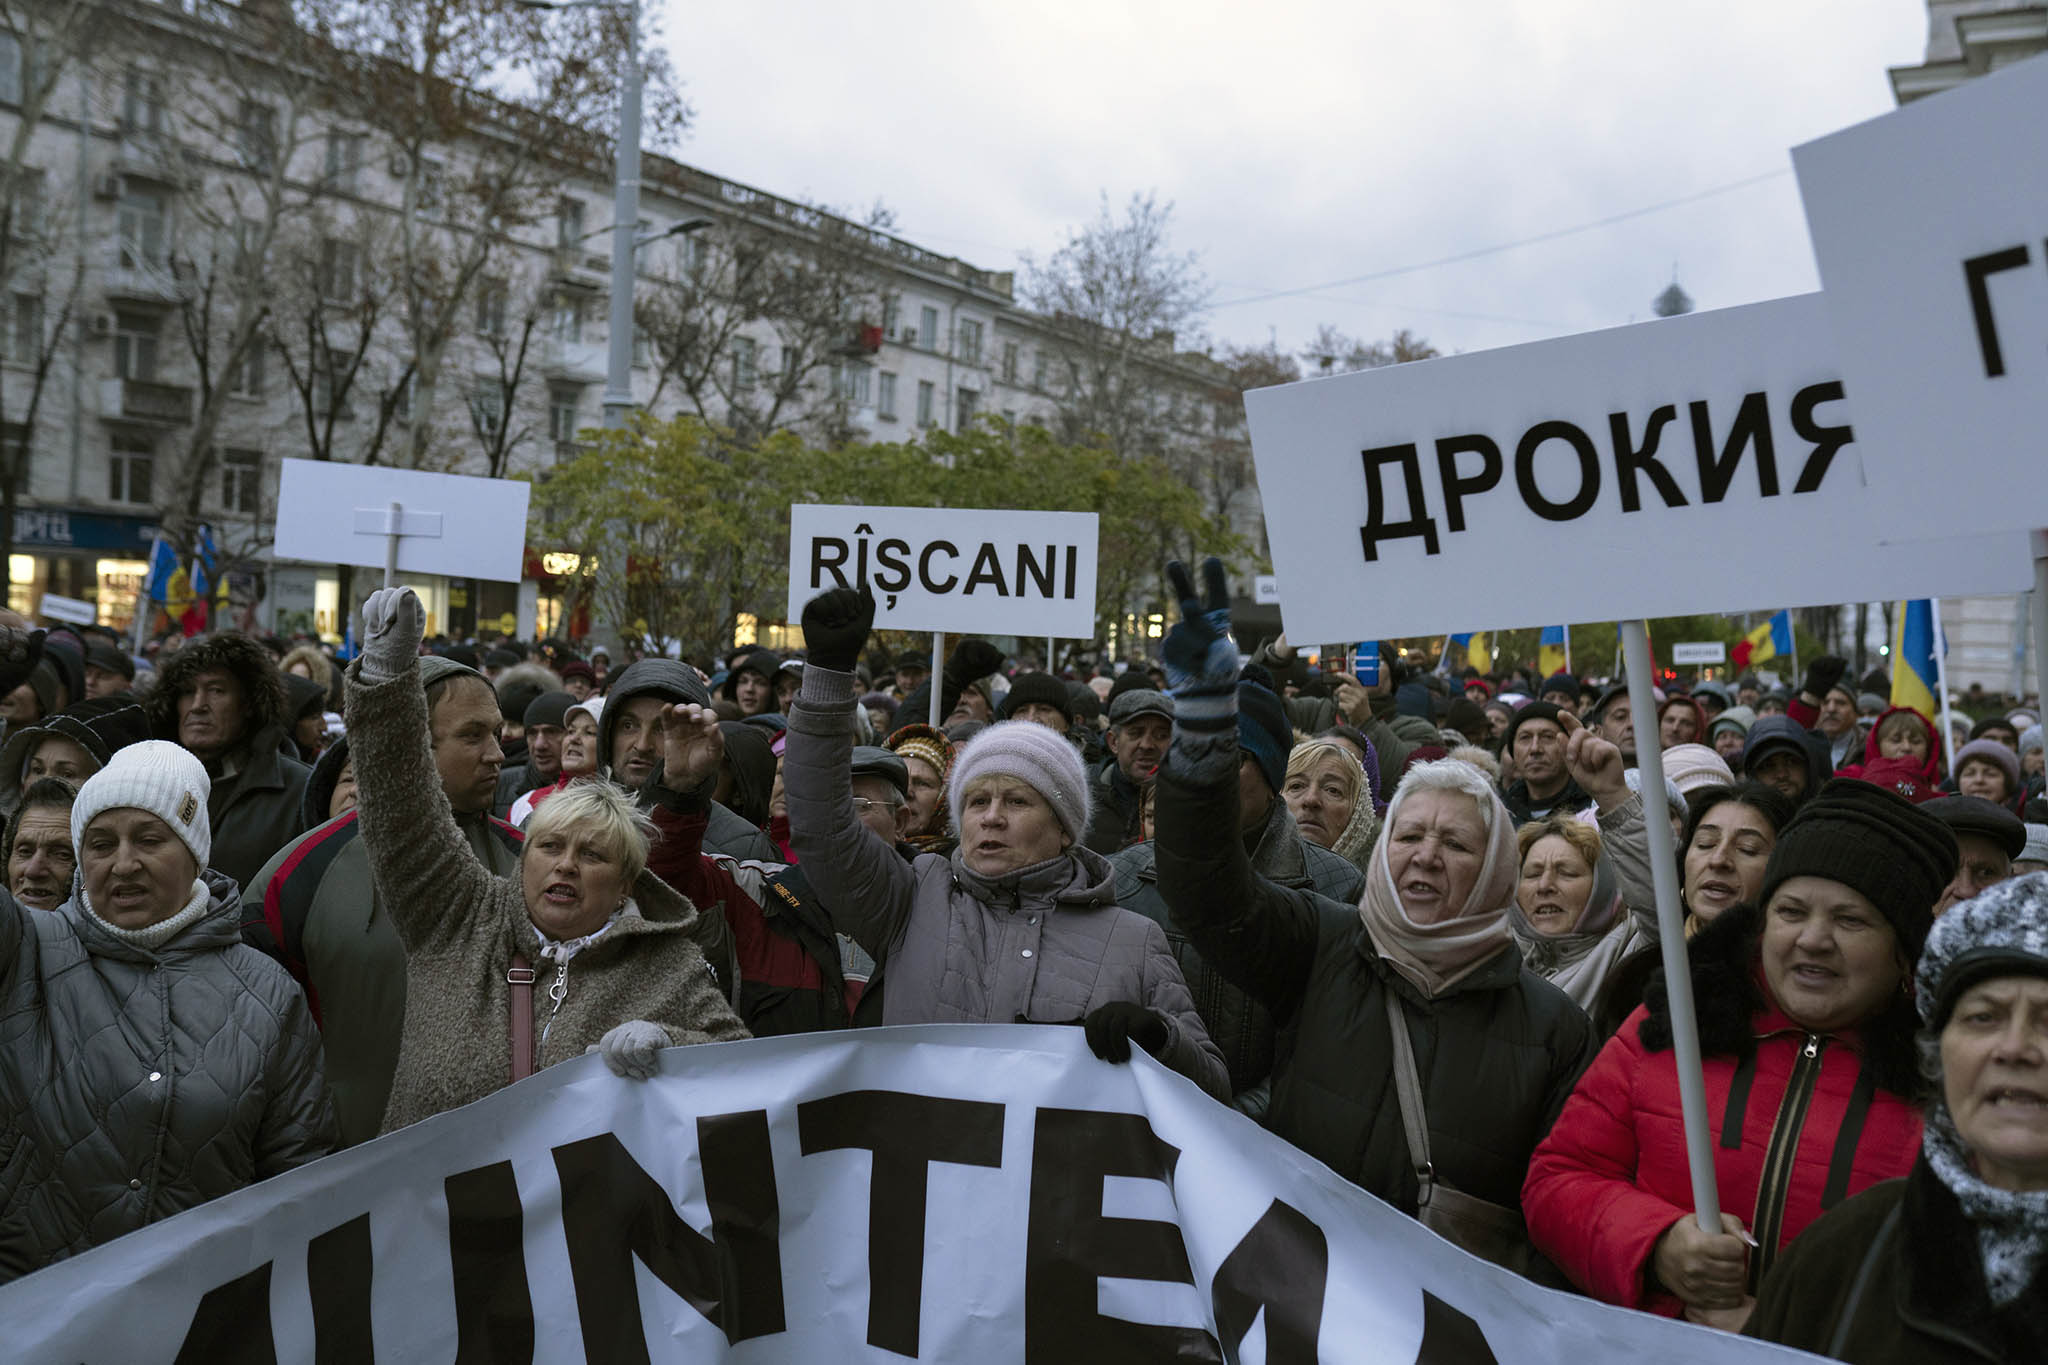 Moldovans protest high prices in the capital, Chisinau, last November. As Russia hiked gas prices, a Russia-backed party has led protests against the pro-Europe government, sometimes paying people to participate. (Andreea Campeanu/The New York Times)